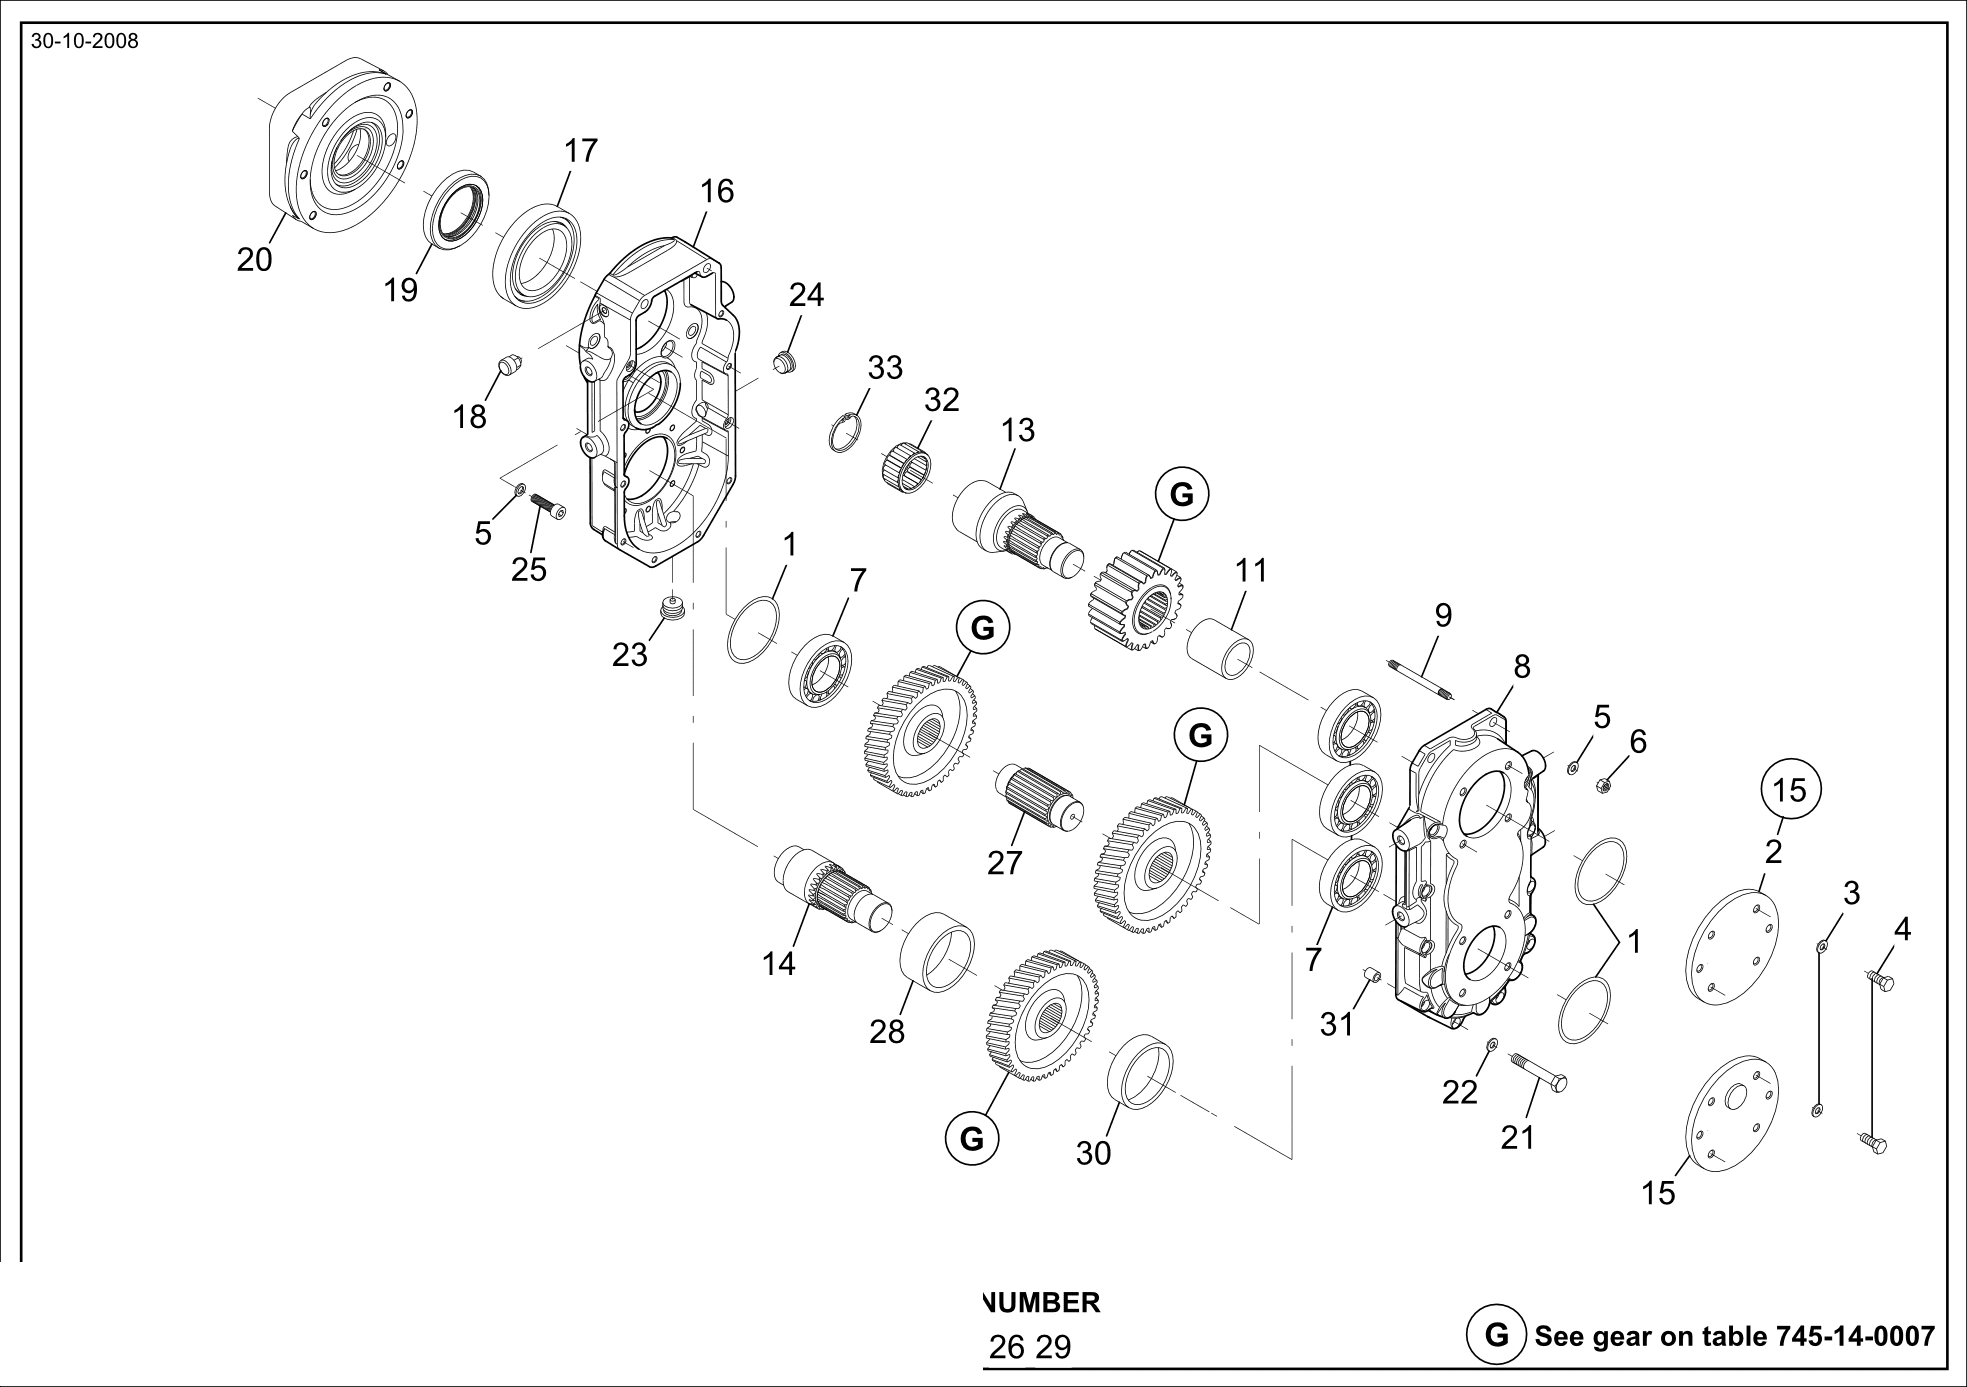 drawing for CNH NEW HOLLAND 153310431 - BUSSOLA (figure 2)